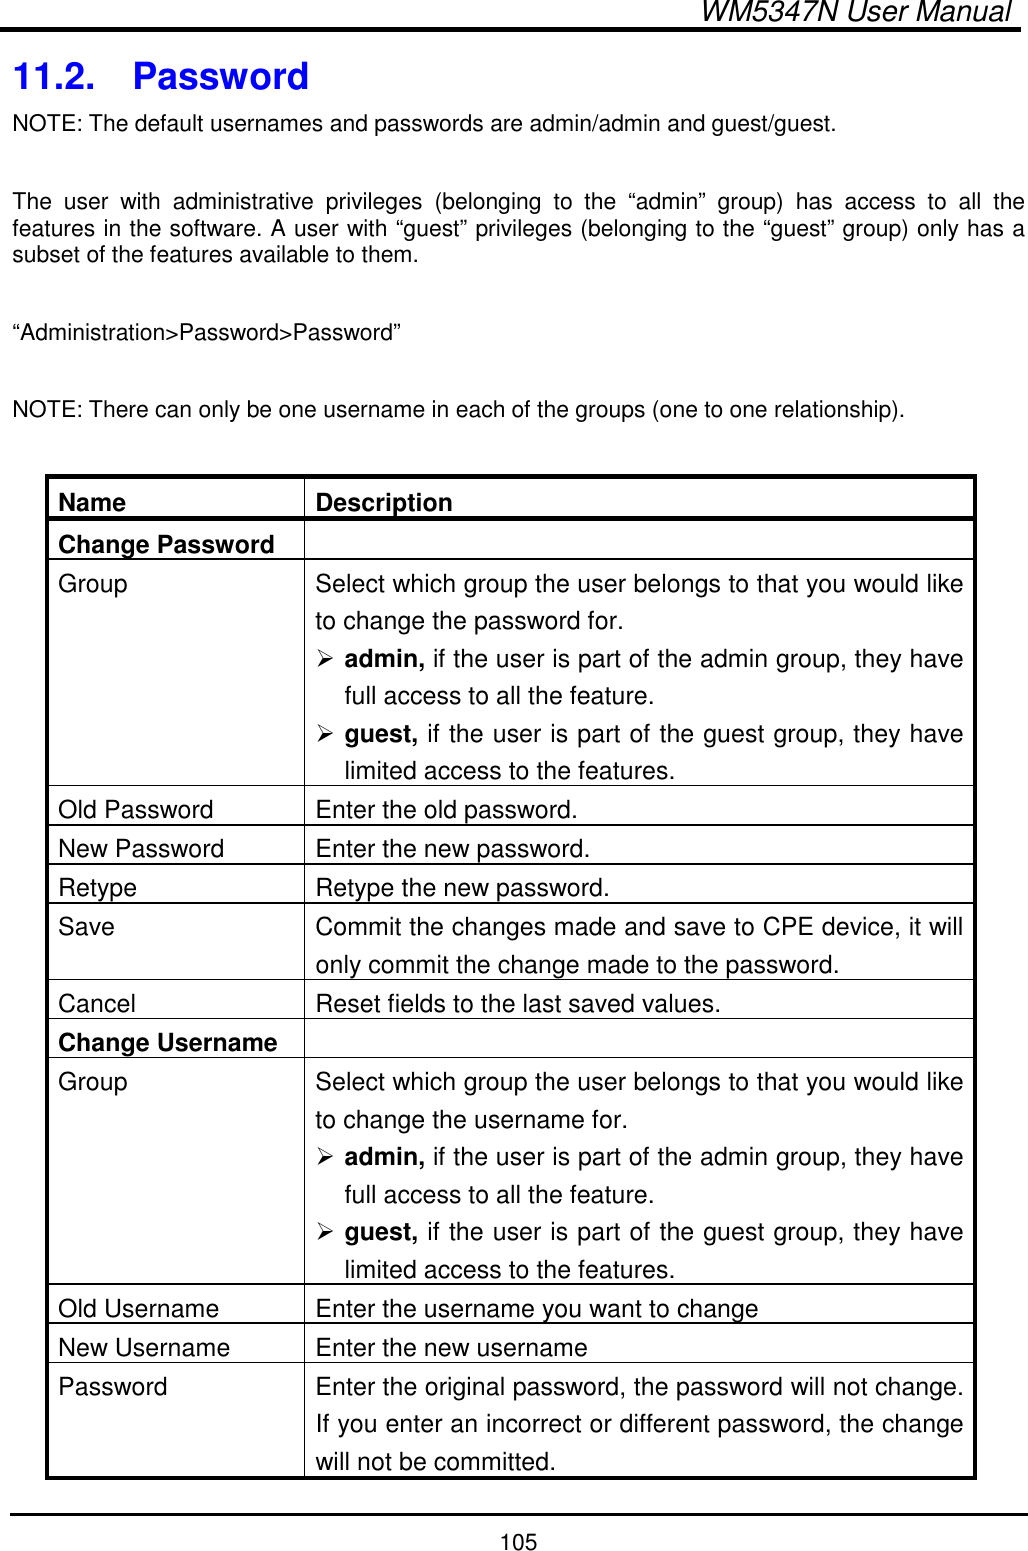  WM5347N User Manual  105 11.2.  Password NOTE: The default usernames and passwords are admin/admin and guest/guest.  The  user  with  administrative  privileges  (belonging  to  the  “admin”  group)  has  access  to  all  the features in the software. A user with “guest” privileges (belonging to the “guest” group) only has a subset of the features available to them.    “Administration&gt;Password&gt;Password”  NOTE: There can only be one username in each of the groups (one to one relationship).  Name  Description Change Password   Group  Select which group the user belongs to that you would like to change the password for.  admin, if the user is part of the admin group, they have full access to all the feature.  guest, if the user is part of the guest group, they have limited access to the features. Old Password  Enter the old password. New Password  Enter the new password. Retype  Retype the new password. Save  Commit the changes made and save to CPE device, it will only commit the change made to the password. Cancel  Reset fields to the last saved values. Change Username   Group  Select which group the user belongs to that you would like to change the username for.  admin, if the user is part of the admin group, they have full access to all the feature.  guest, if the user is part of the guest group, they have limited access to the features. Old Username  Enter the username you want to change New Username  Enter the new username Password  Enter the original password, the password will not change. If you enter an incorrect or different password, the change will not be committed. 